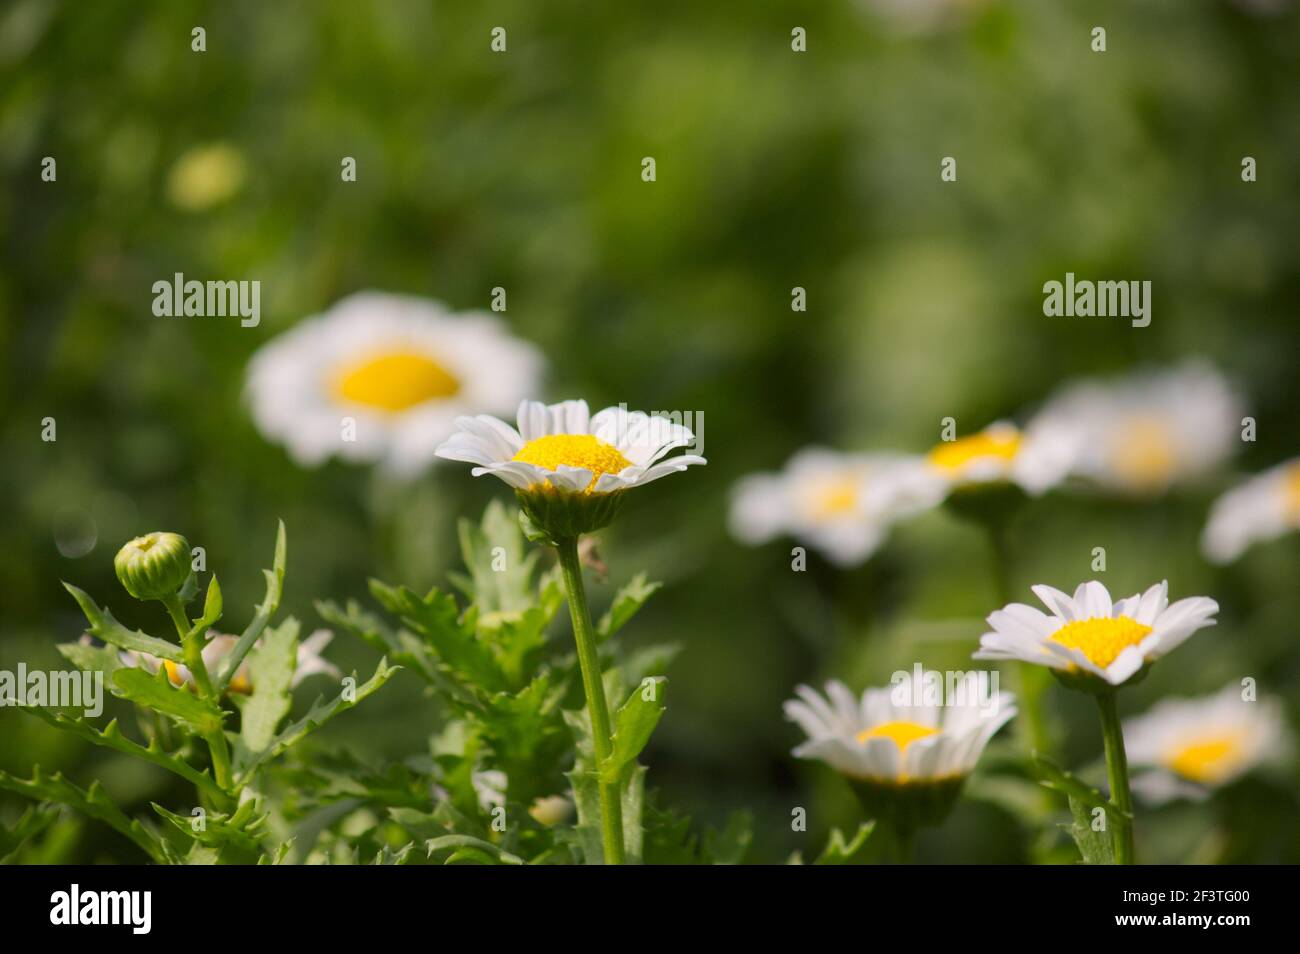 Image of some white mini daisy flowers of the variety Leucanthemum paludosum with a green background and copy space Stock Photo